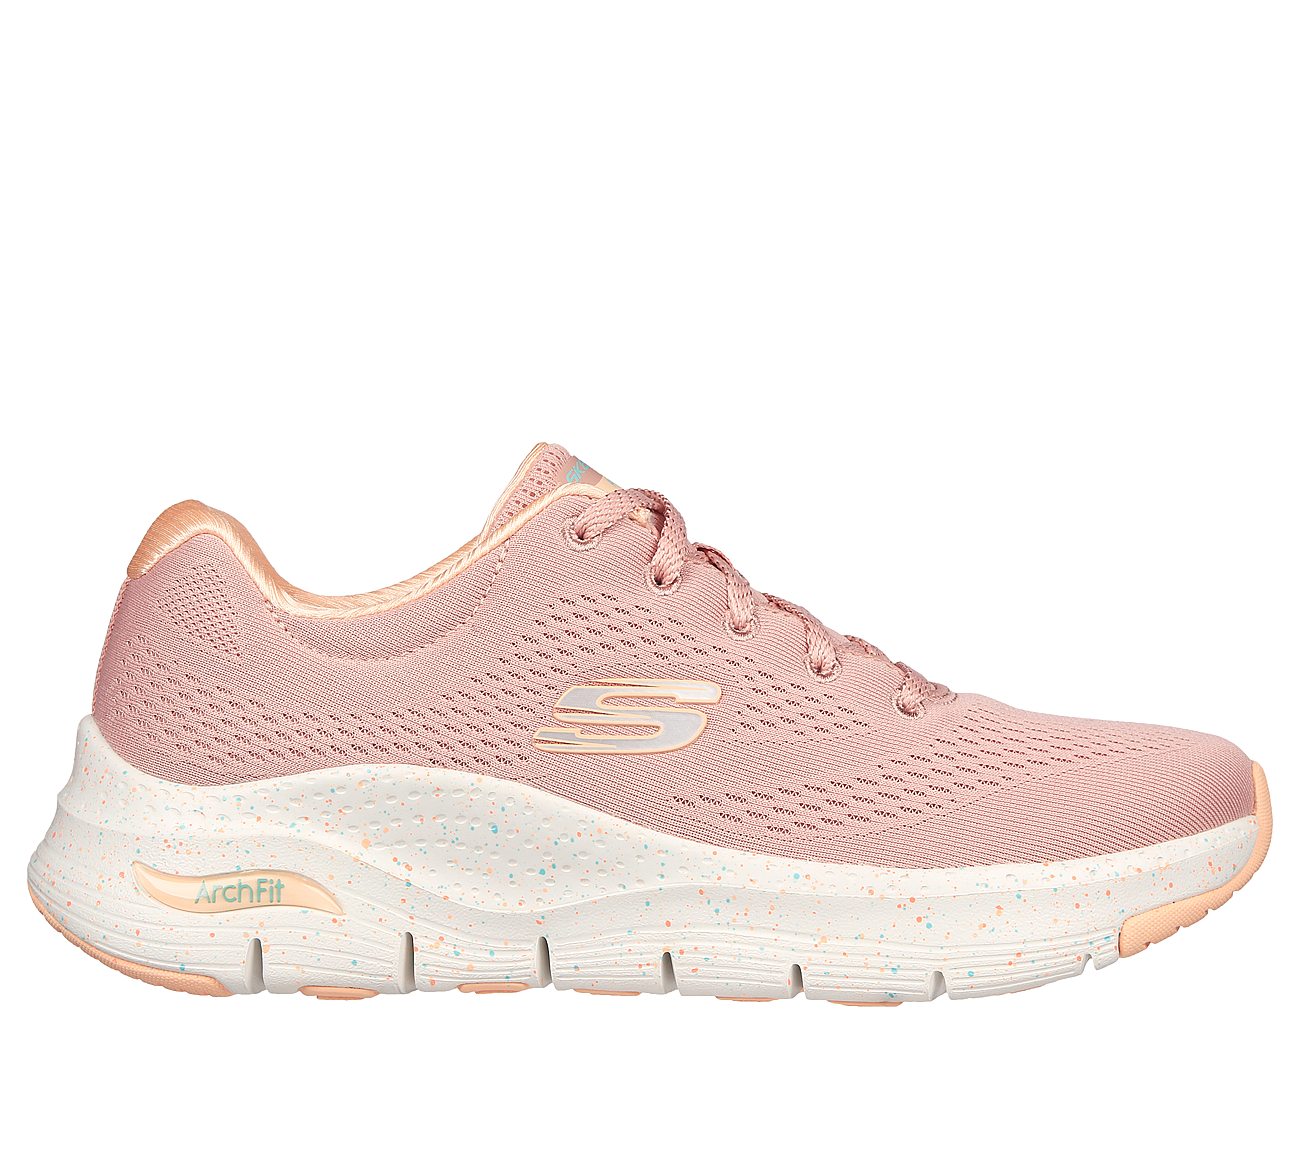 ARCH FIT, PINK/MULTI Footwear Lateral View